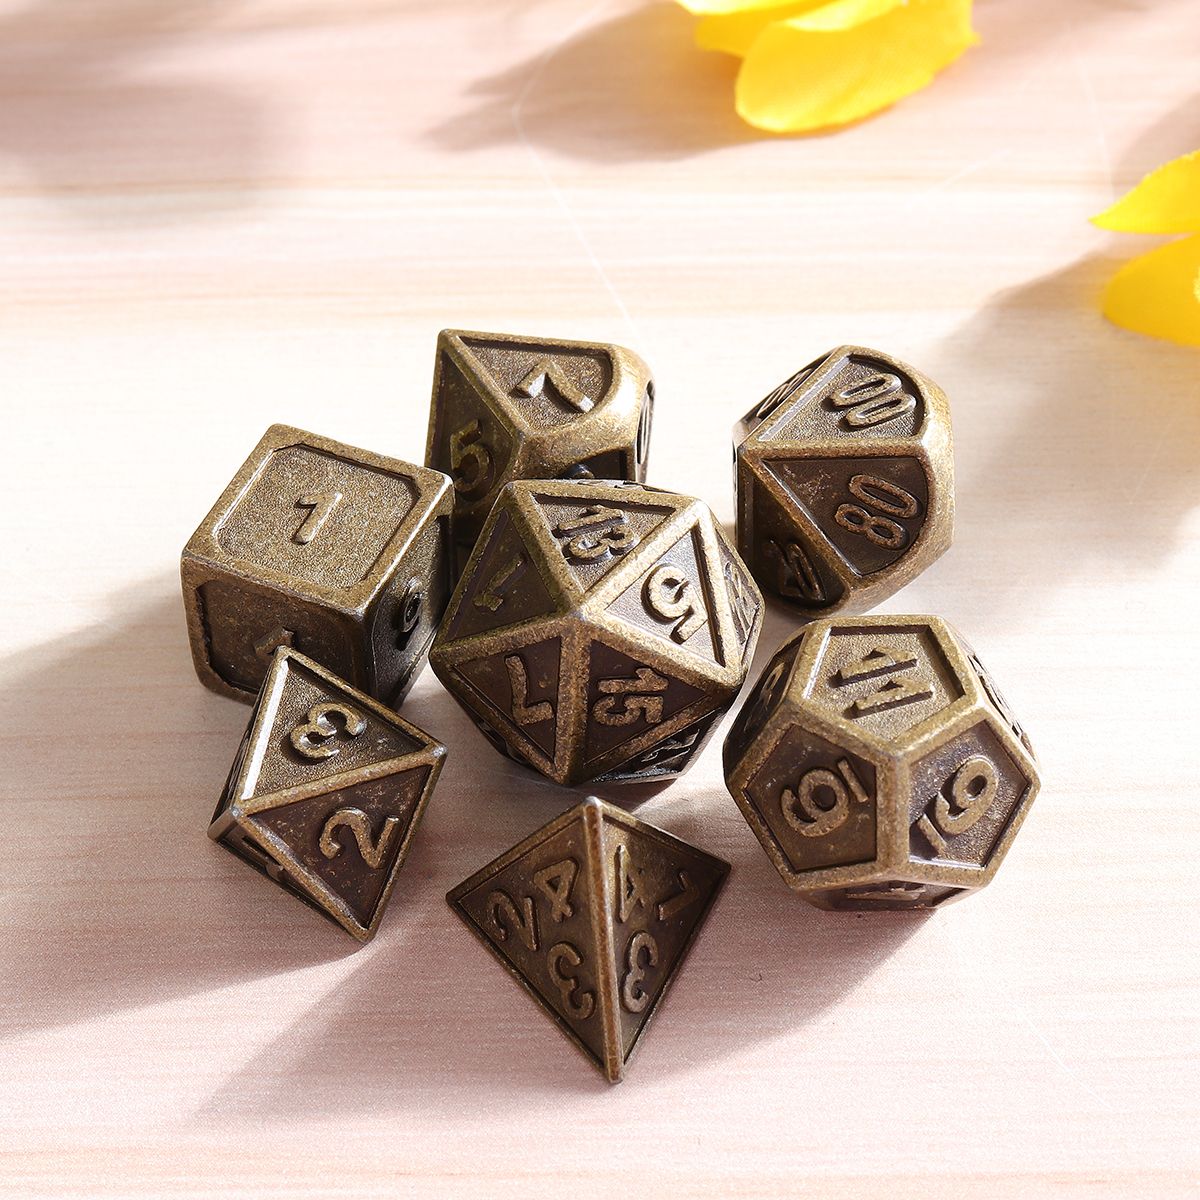 7pcs-Embossed-Heavy-Metal-Polyhedral-Dices-RPG-Multisided-Dices-Set-With-Bag-1391319